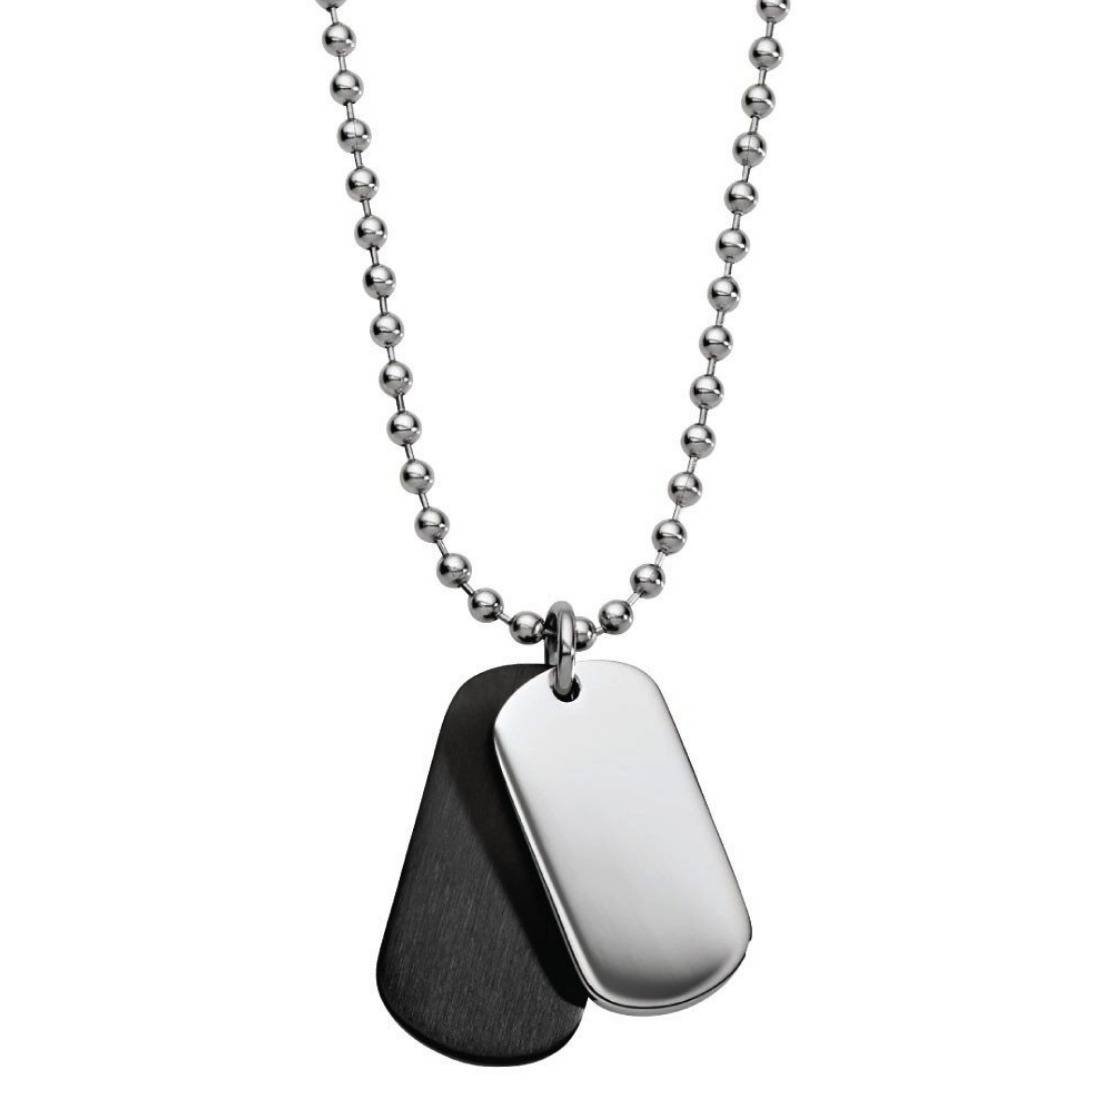 men's photo engraved dog tags